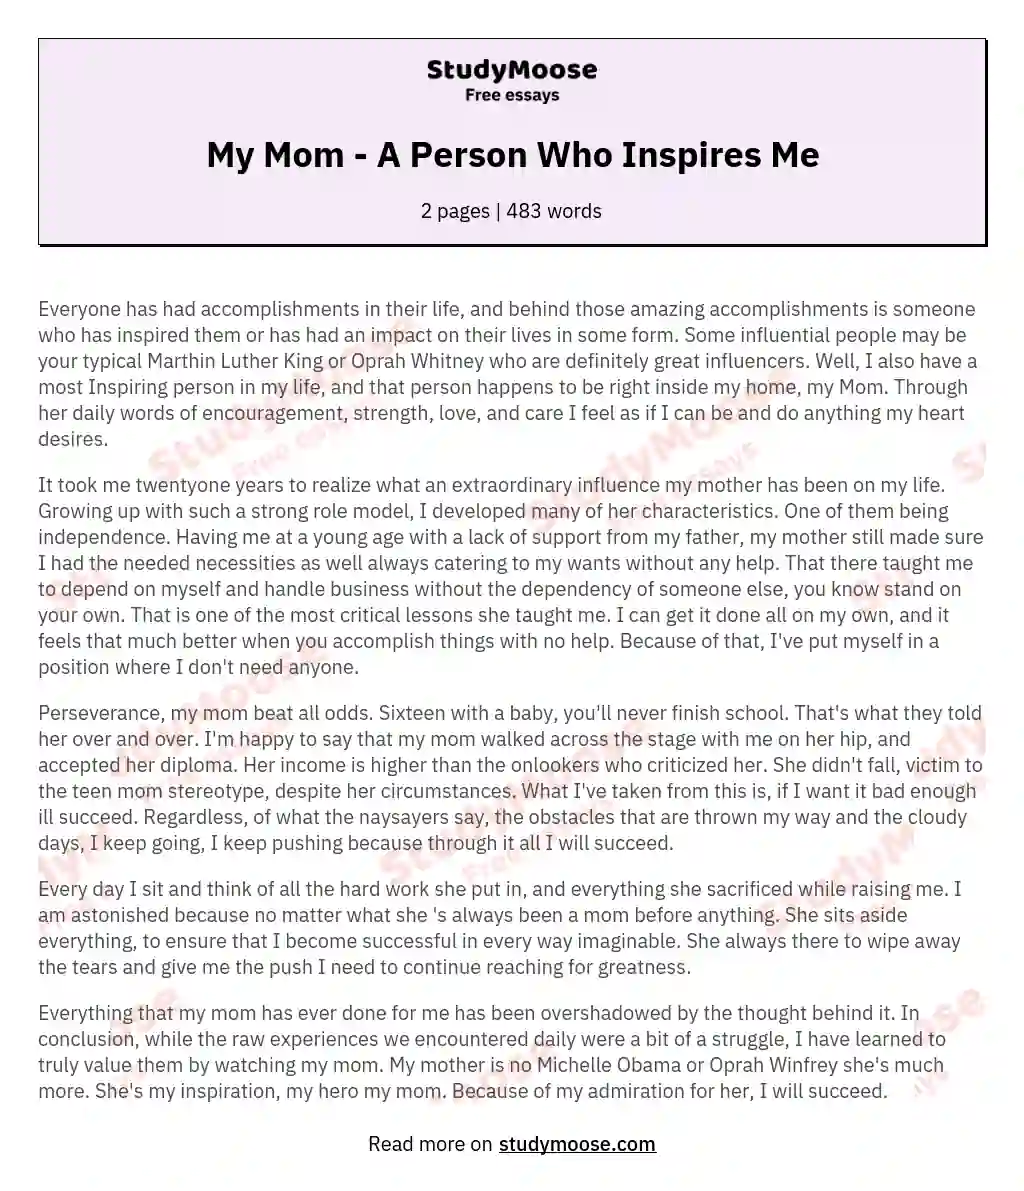 My Mom - A Person Who Inspires Me essay